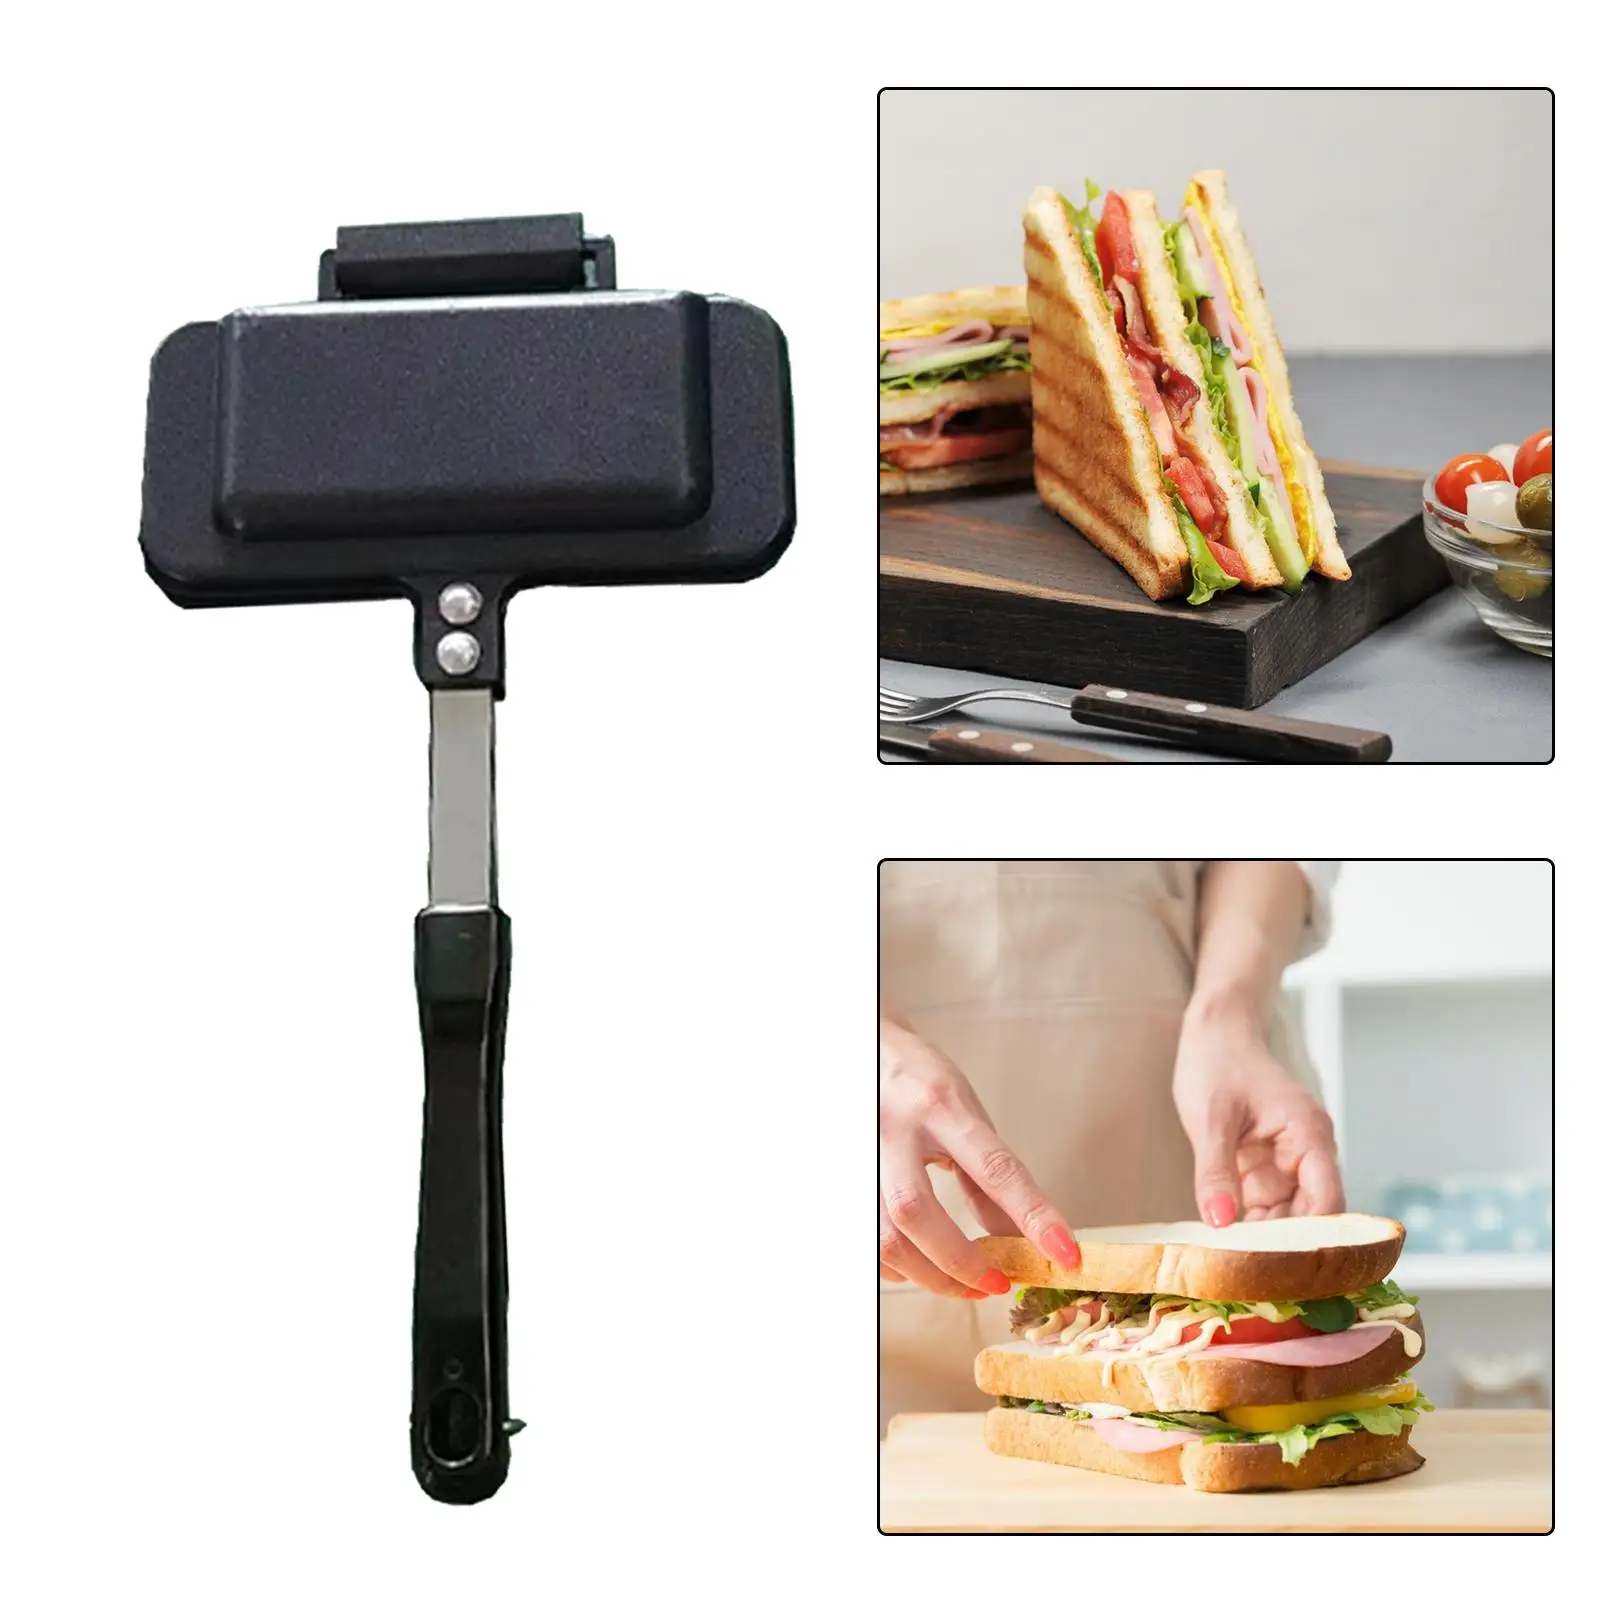 Breakfast Sandwich Maker Double Sided Frying Pan Grill Pan Sandwich Baking Pan for Breakfast Tortillas Muffins Toast Dining Room